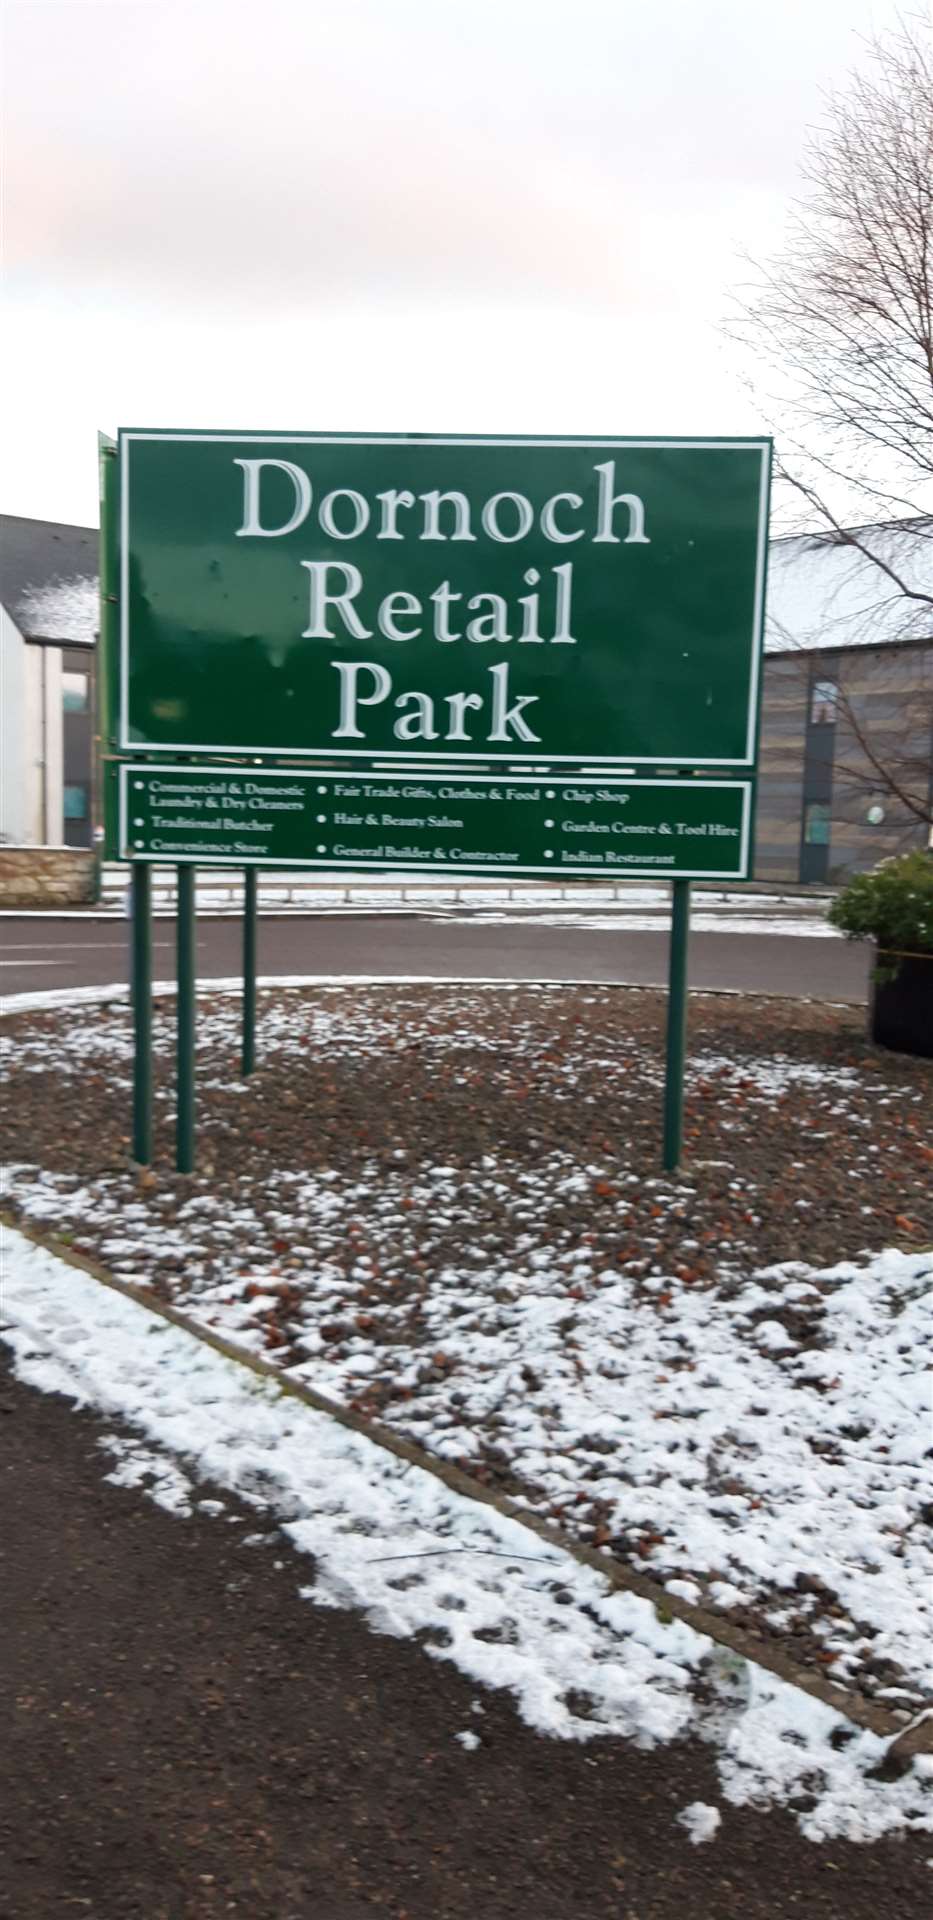 Two new units have been proposed for Dornoch Retail Park.